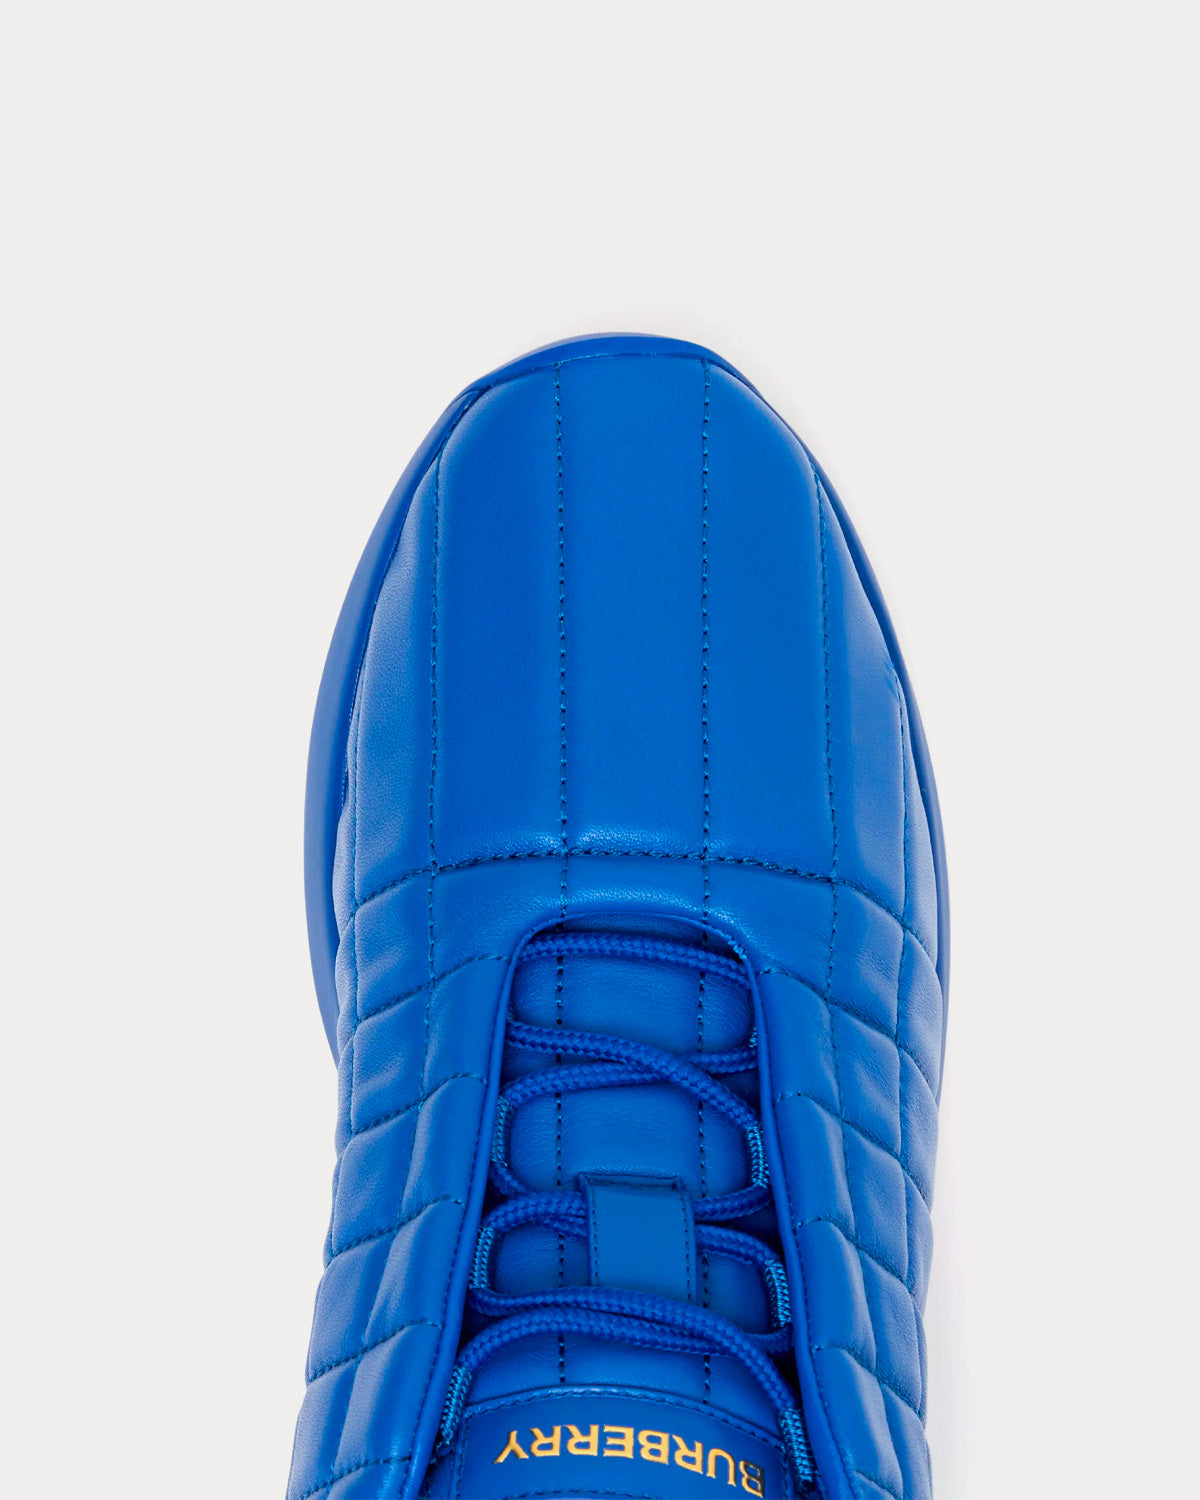 Burberry - Classic Quilted Leather Deep Marine Blue Low Top Sneakers